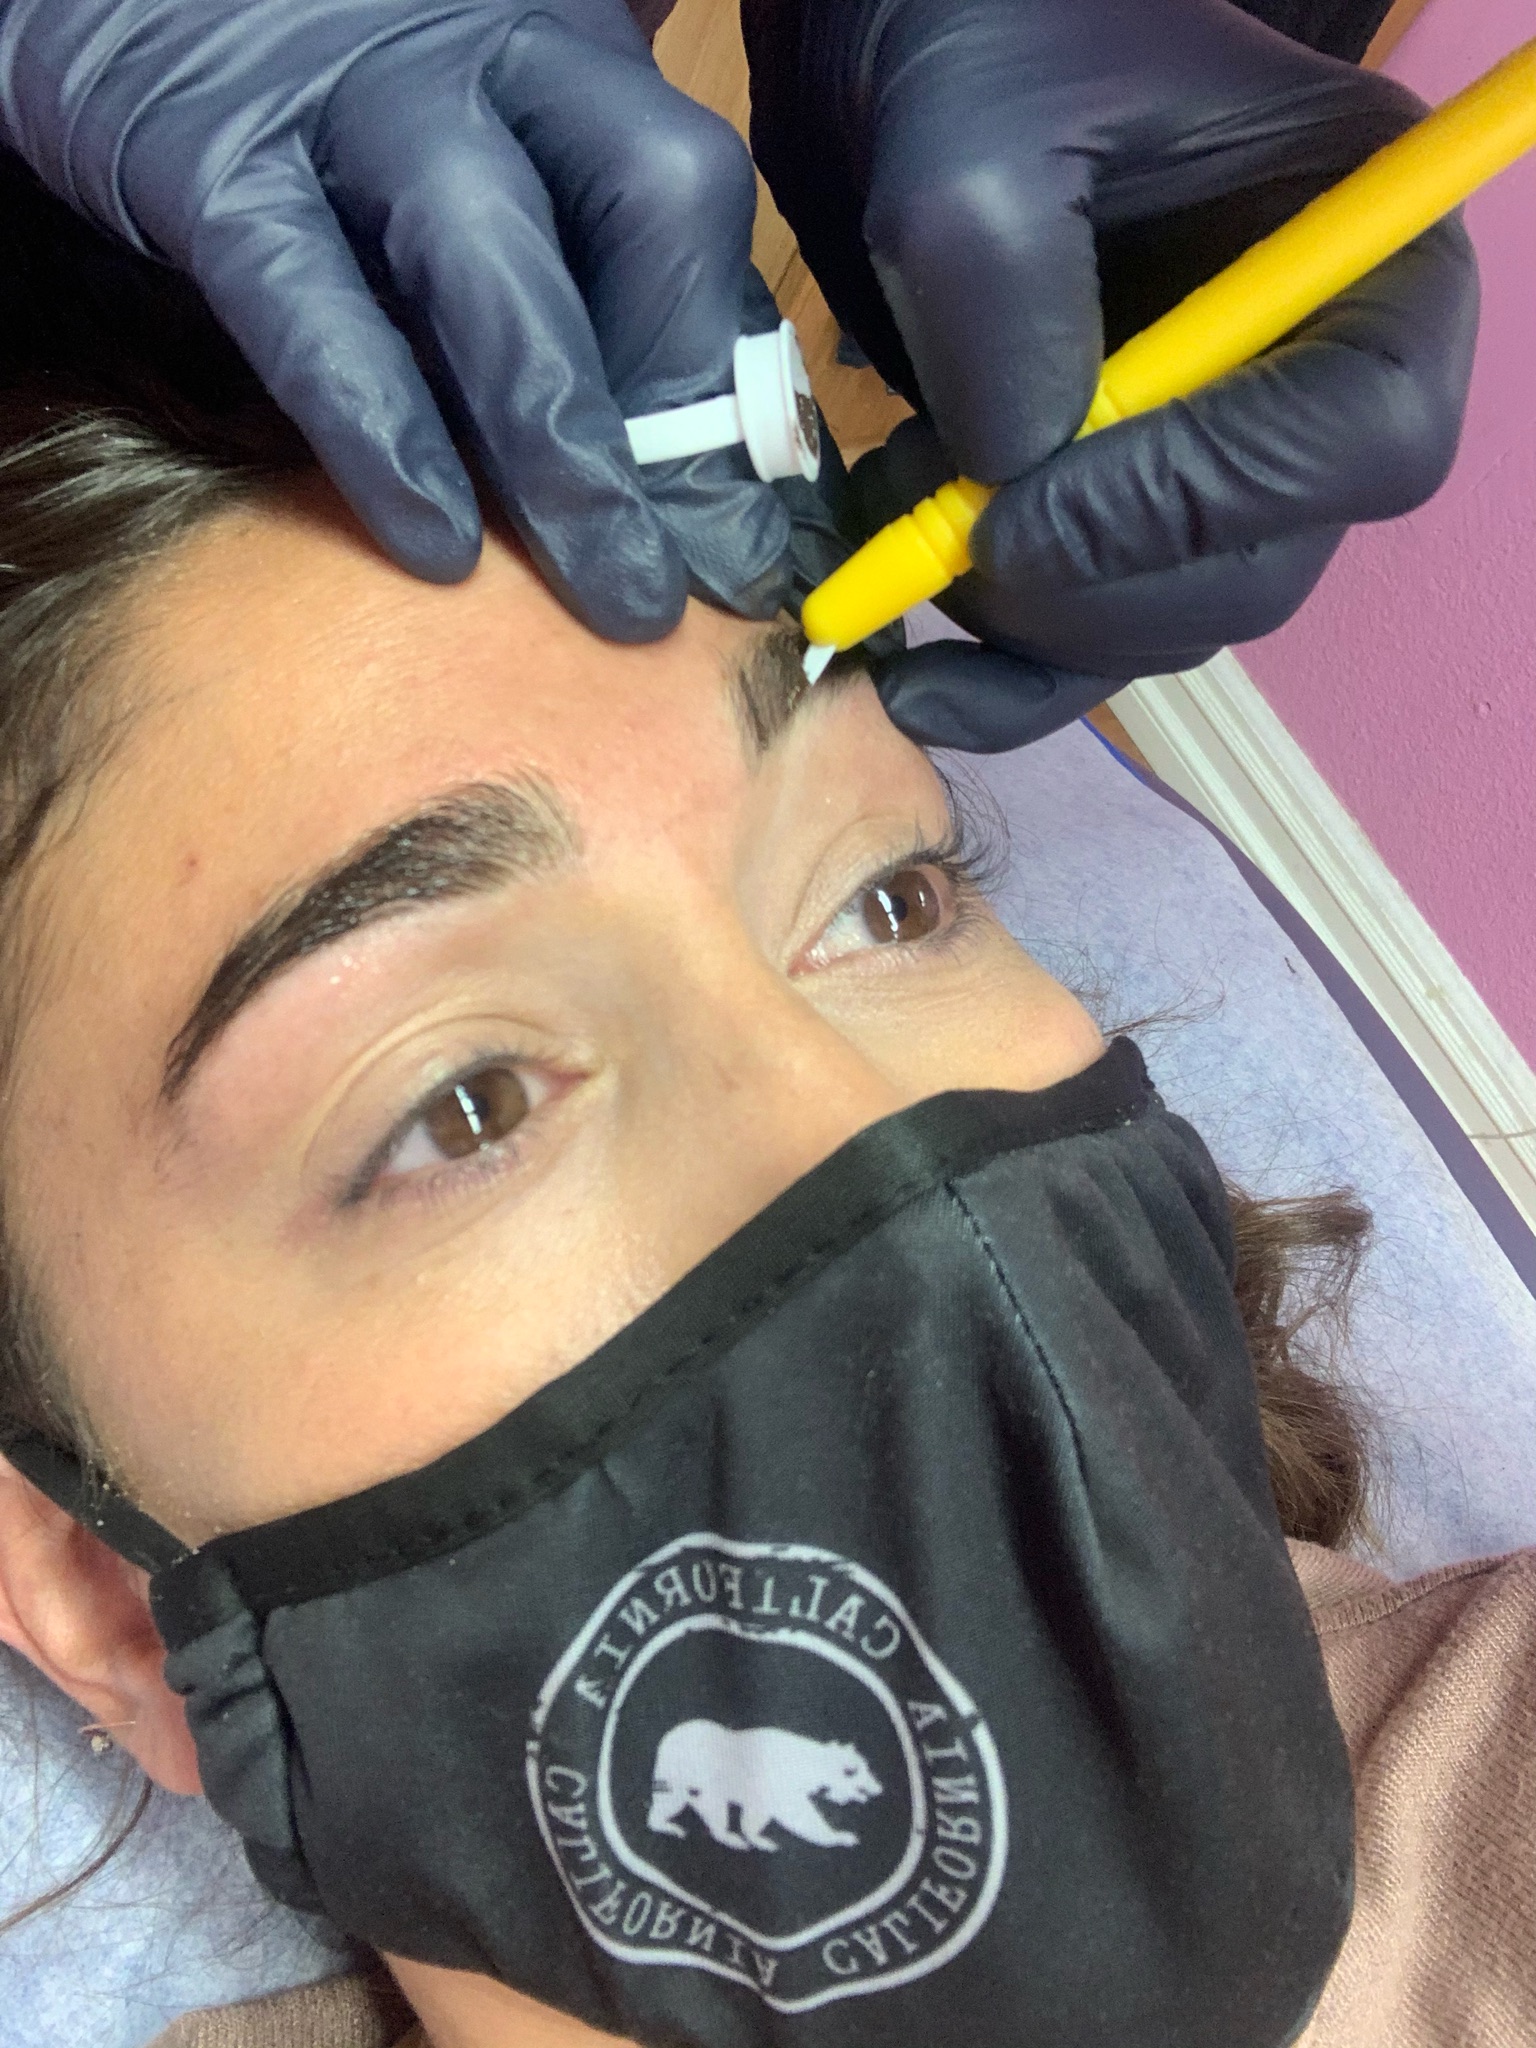 Microblading Photos Of The Day By Day Healing Process Alex Izzo